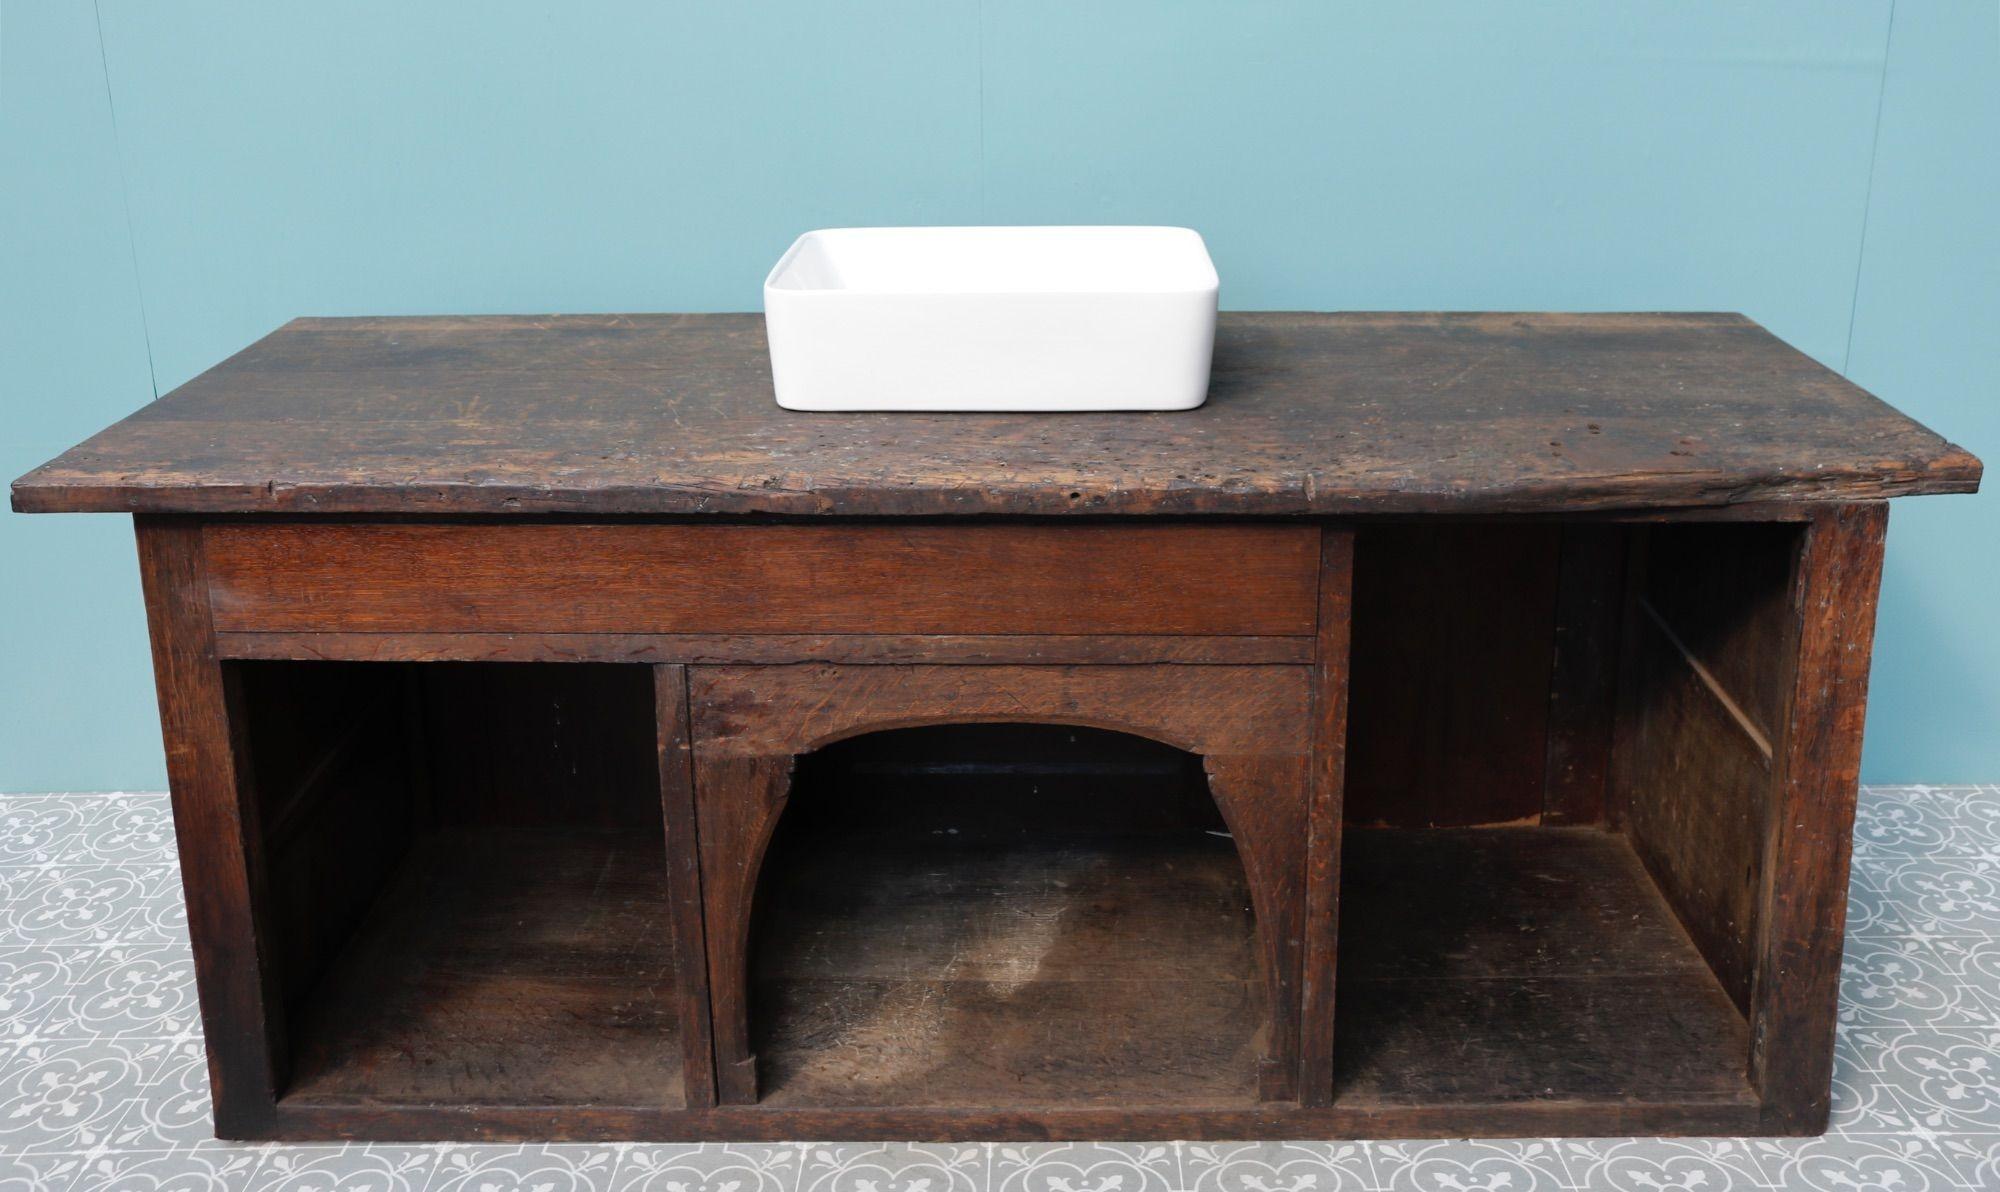 Reclaimed Oak Unit with Utility Basin In Fair Condition For Sale In Wormelow, Herefordshire